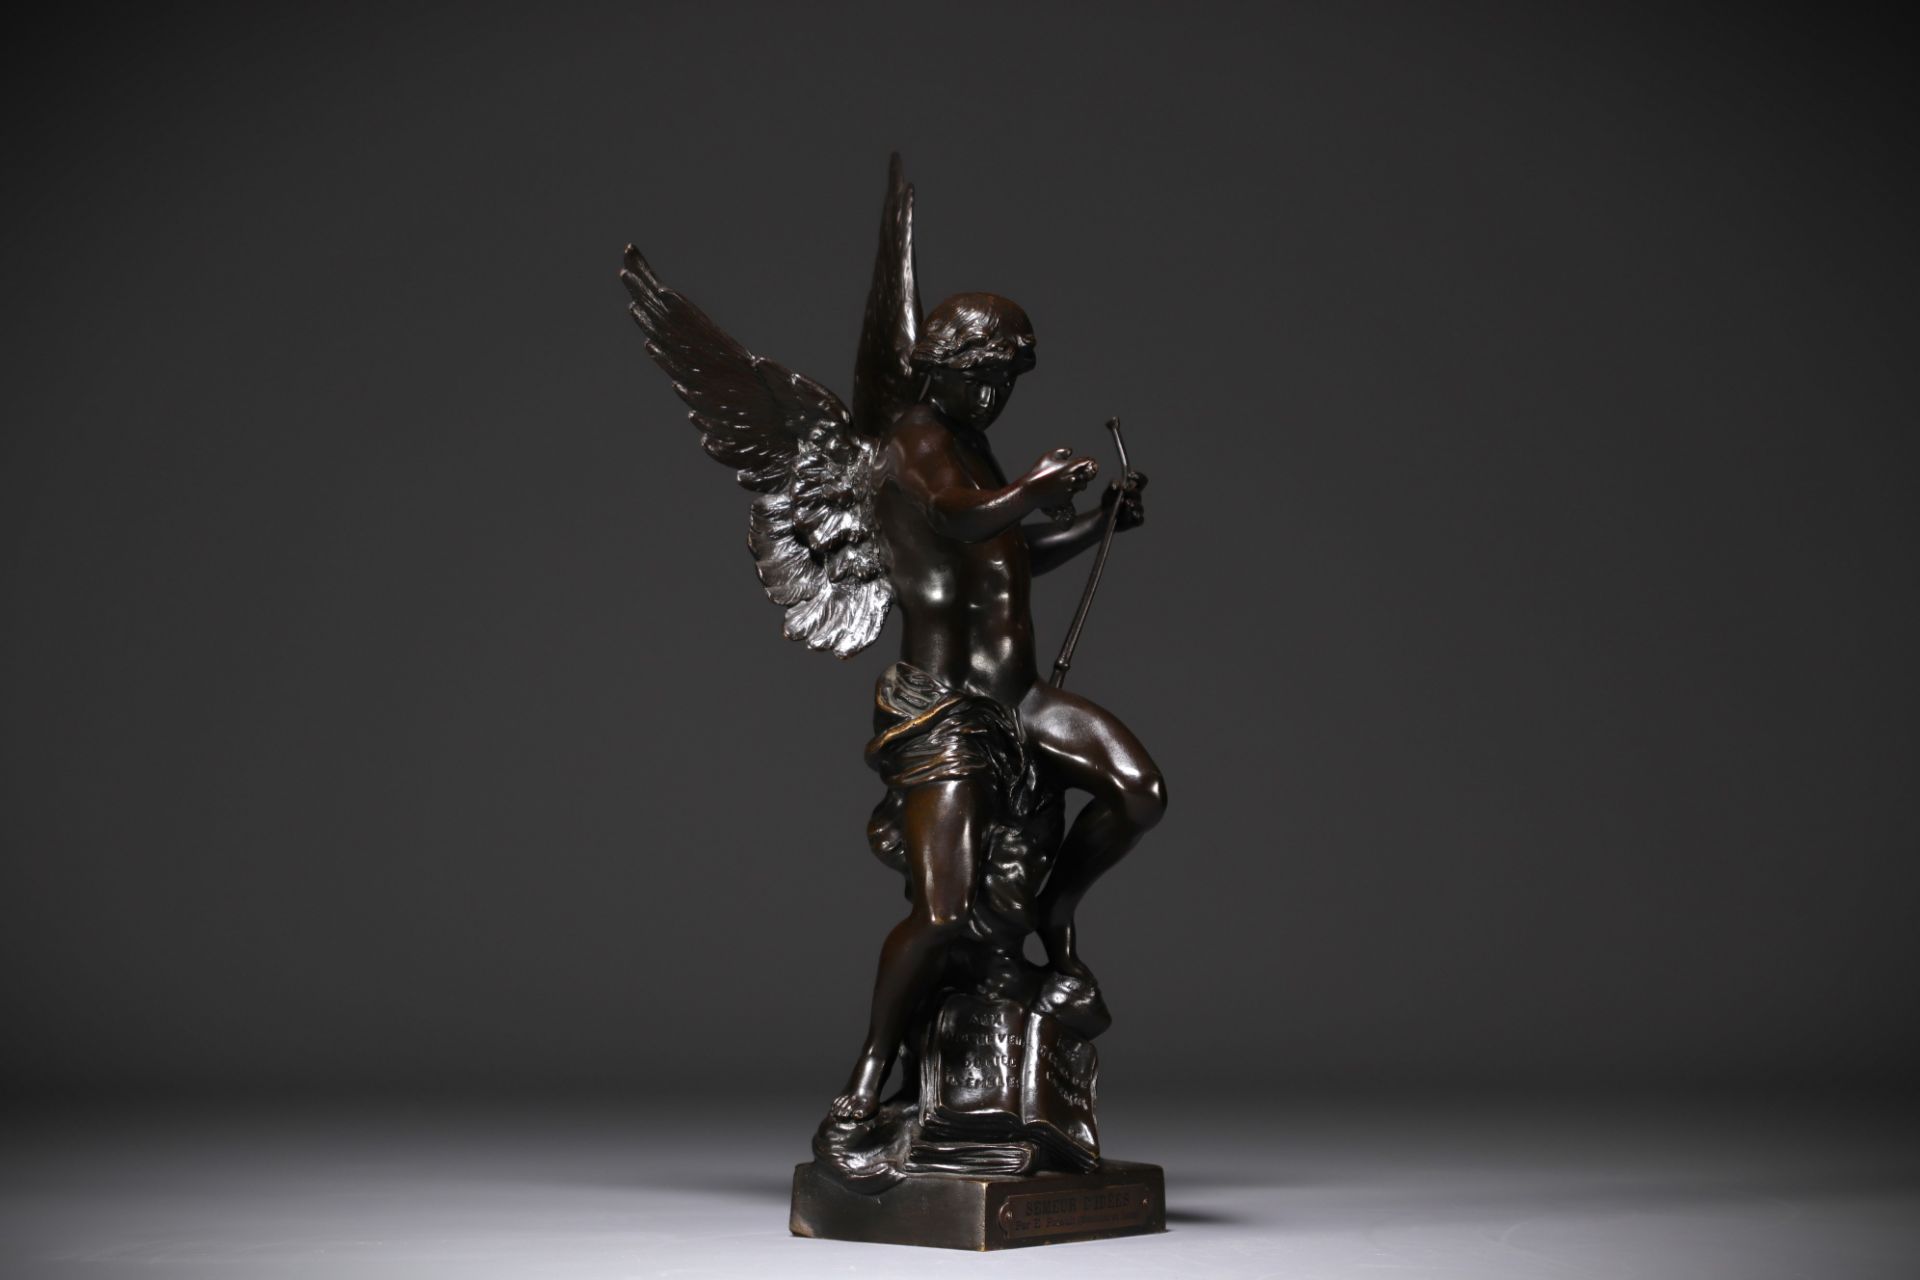 Emile Louis PICAULT (1833-1915) - "The sower of ideas" Bronze with brown patina, late 19th century. - Image 4 of 6